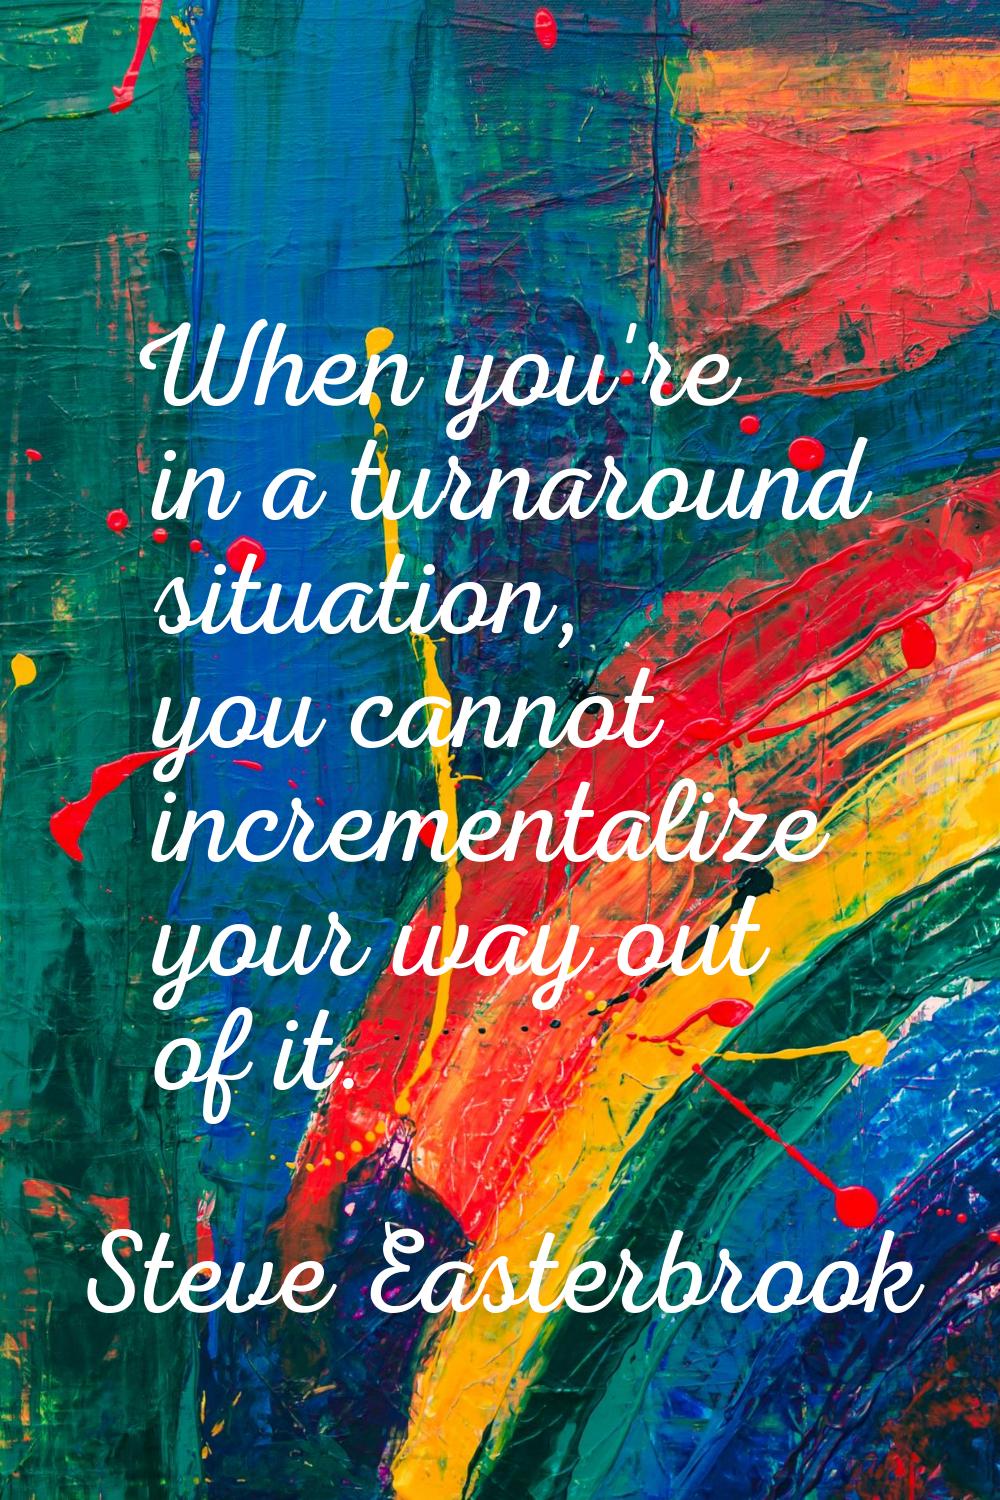 When you're in a turnaround situation, you cannot incrementalize your way out of it.